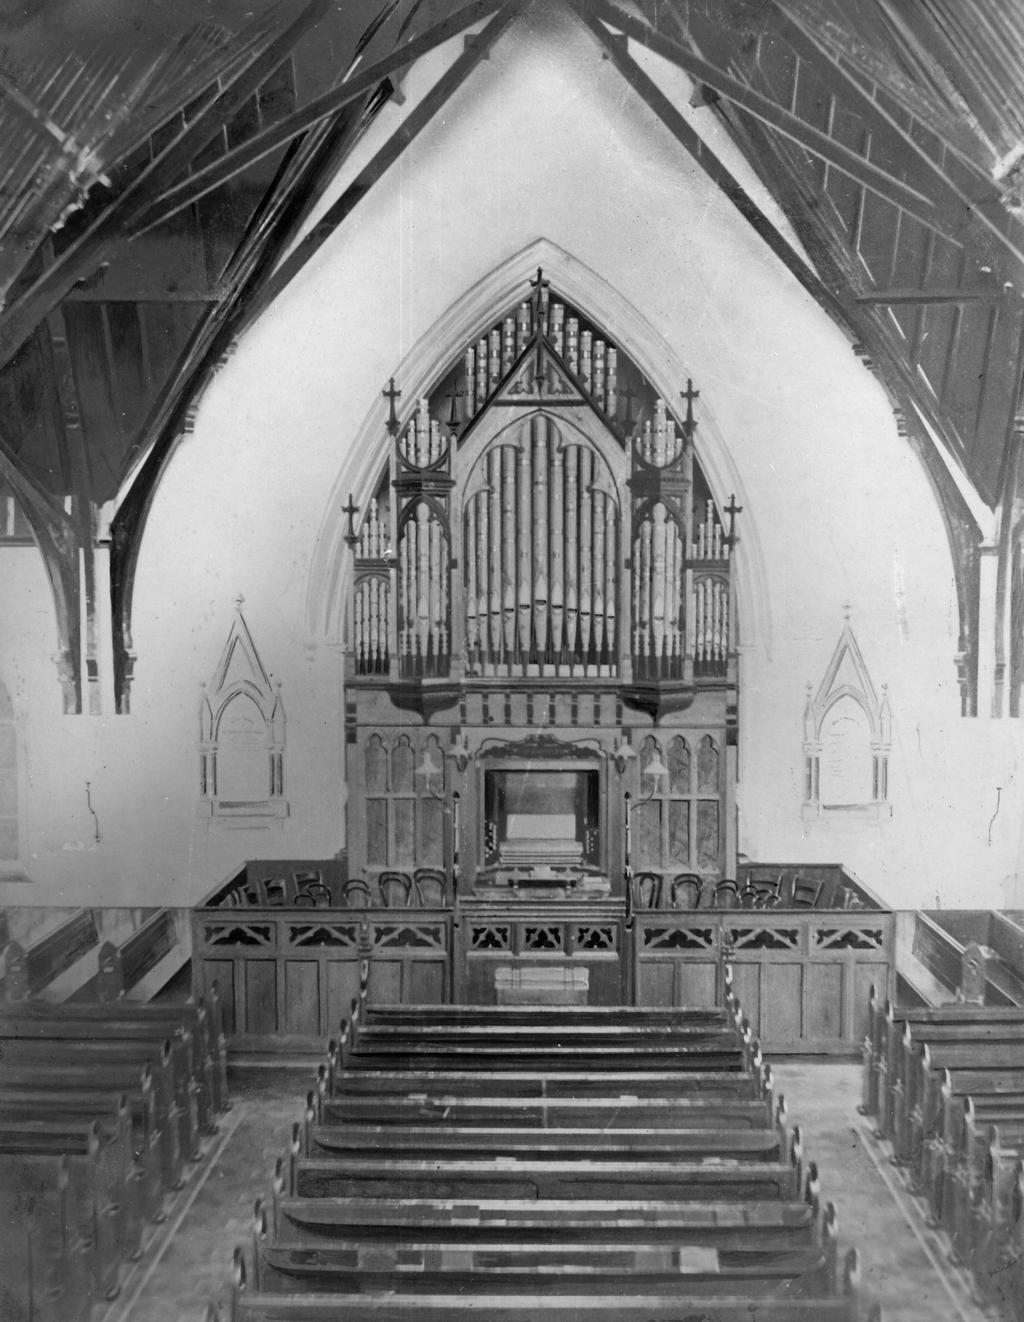 This early photograph of the sanctuary may date from pre-1907 as the lighting appears to be by oil lamps.